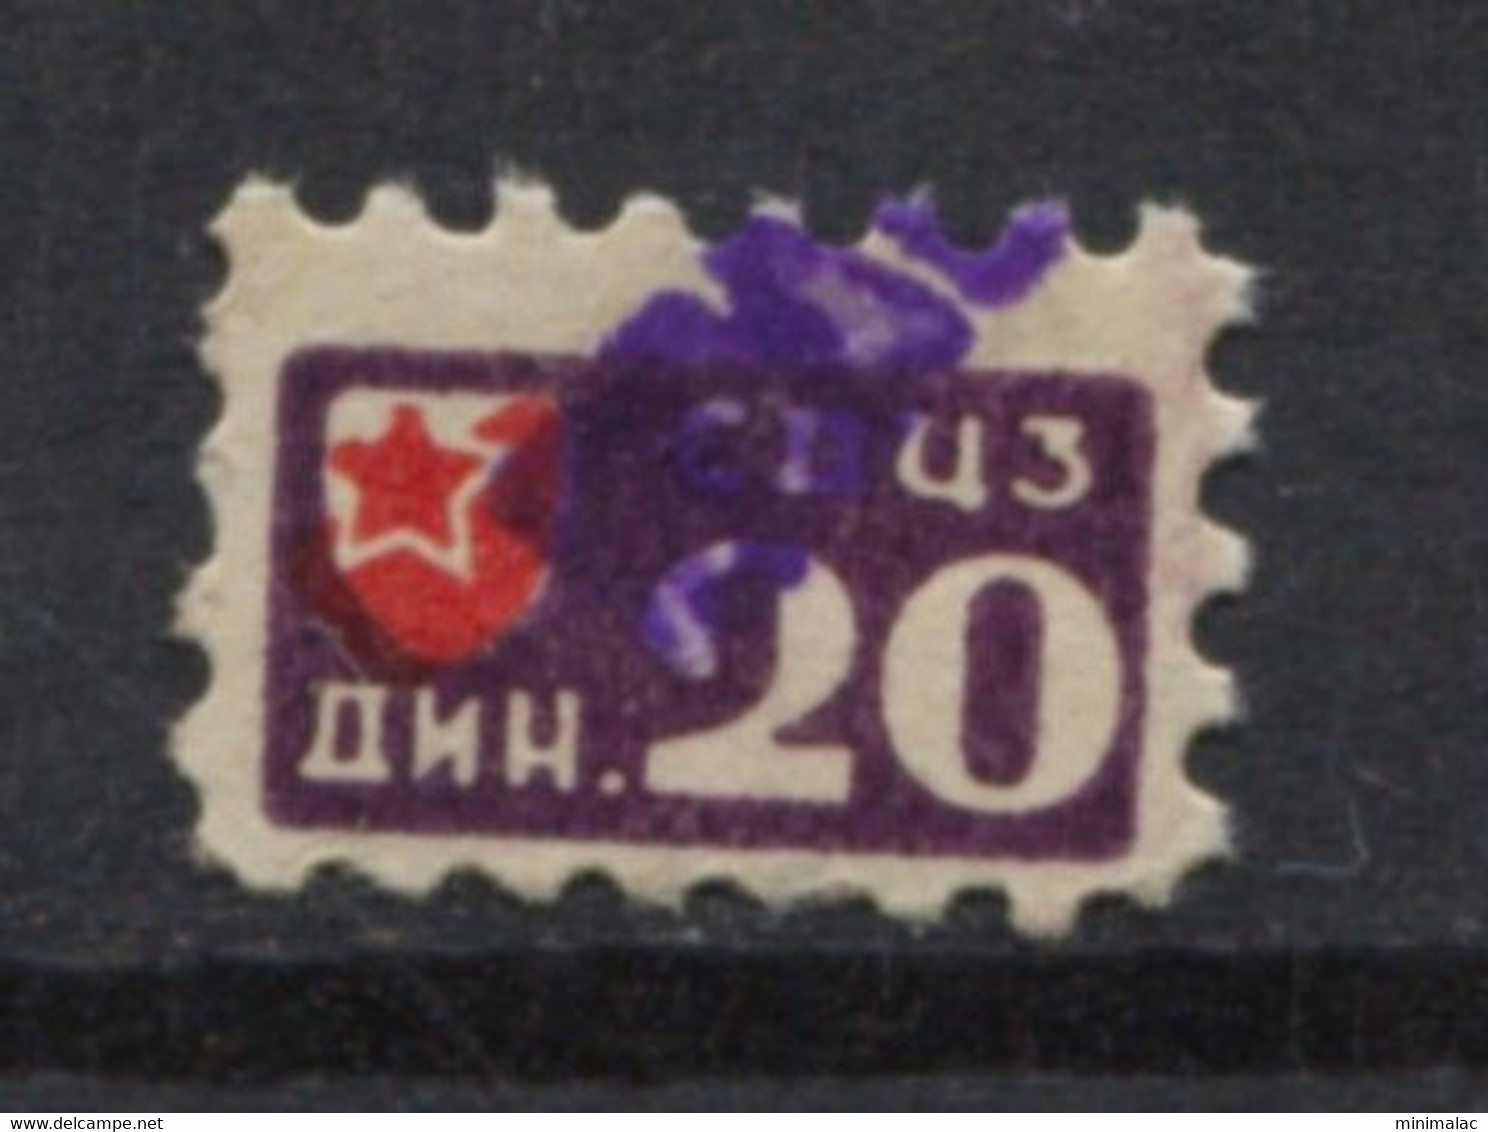 Yugoslavia, Sports Society Red Star Beograd, Football, Stamp For Membership, Revenue, Tax Stamp 20 - Officials